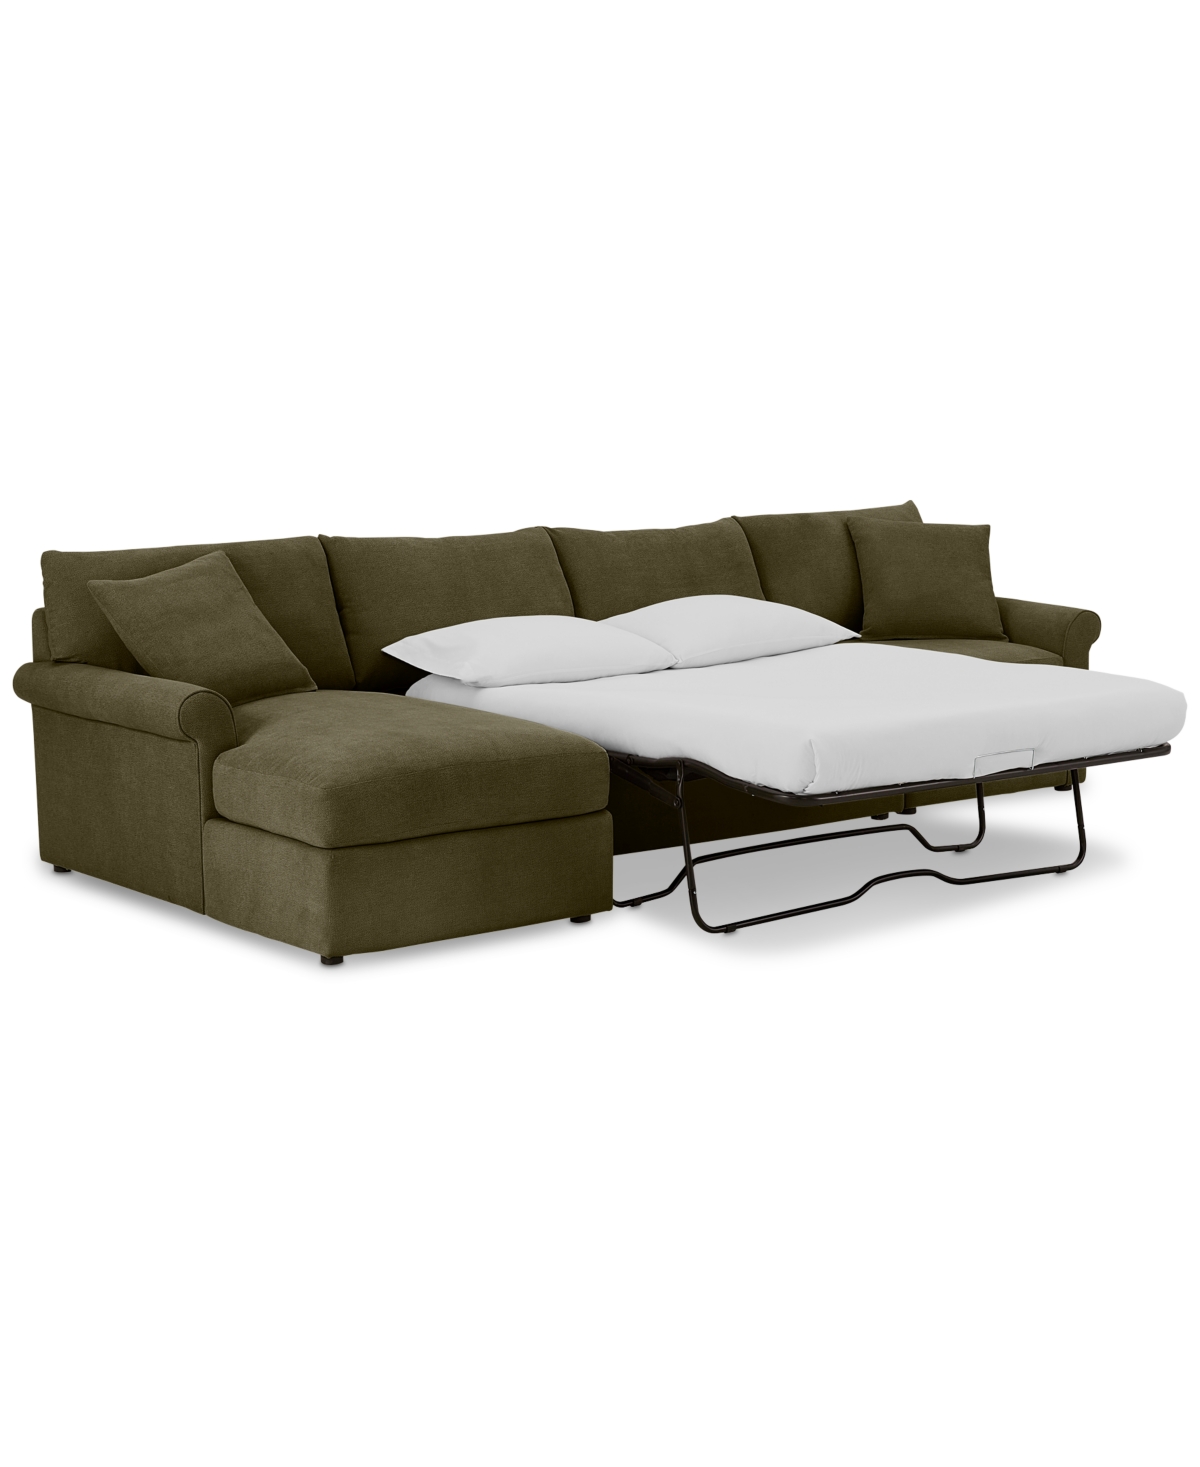 Furniture Wrenley 134" 3-pc. Fabric Sectional Chaise Sleeper Sofa, Created For Macy's In Olive